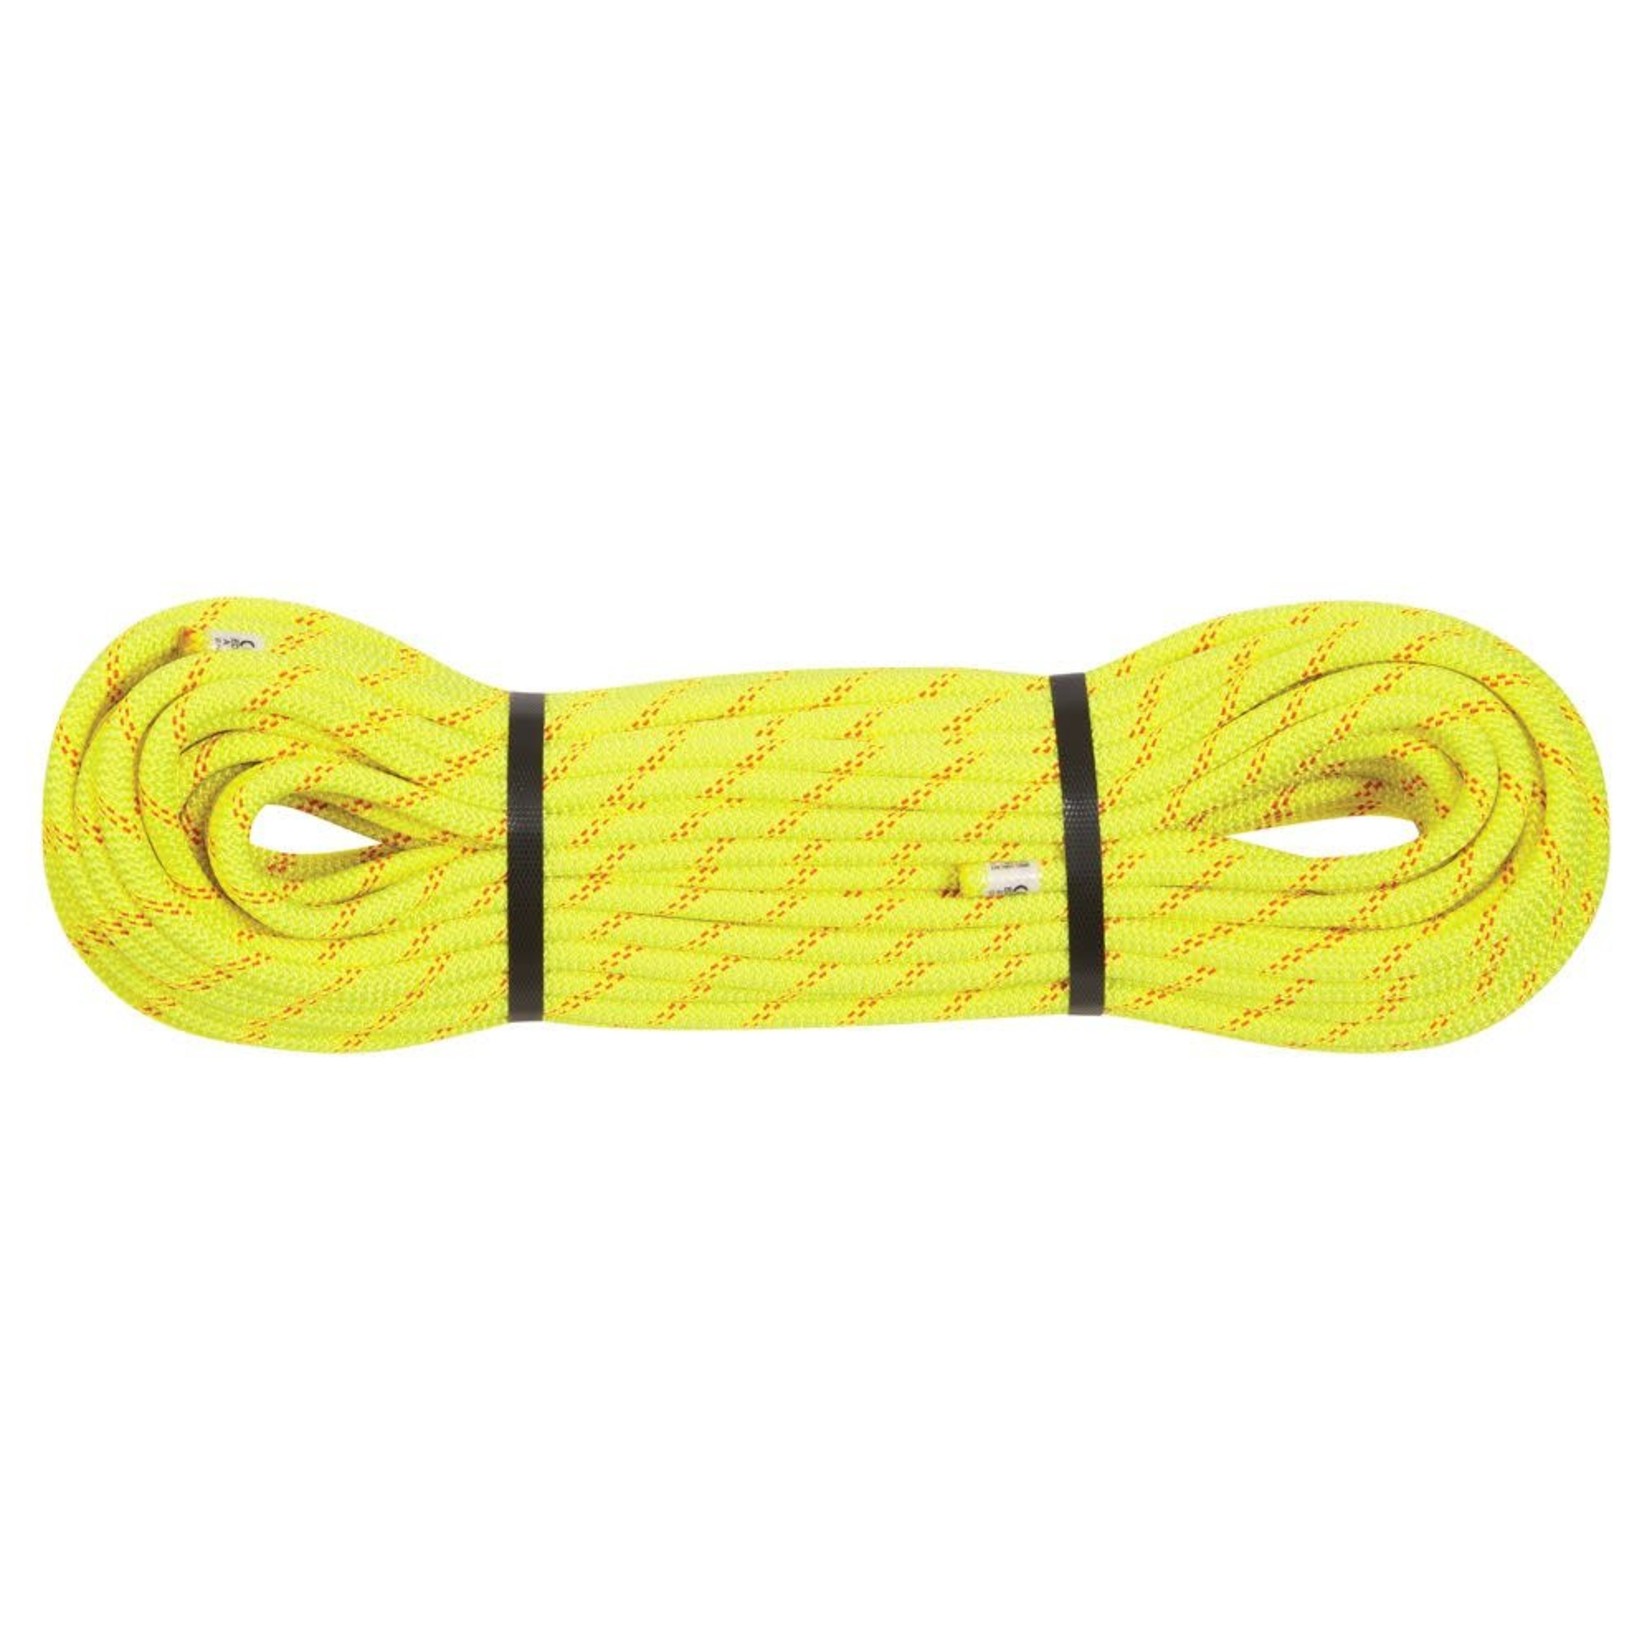 EdelWeiss Edel Weiss Canyon Rope 9.6MM